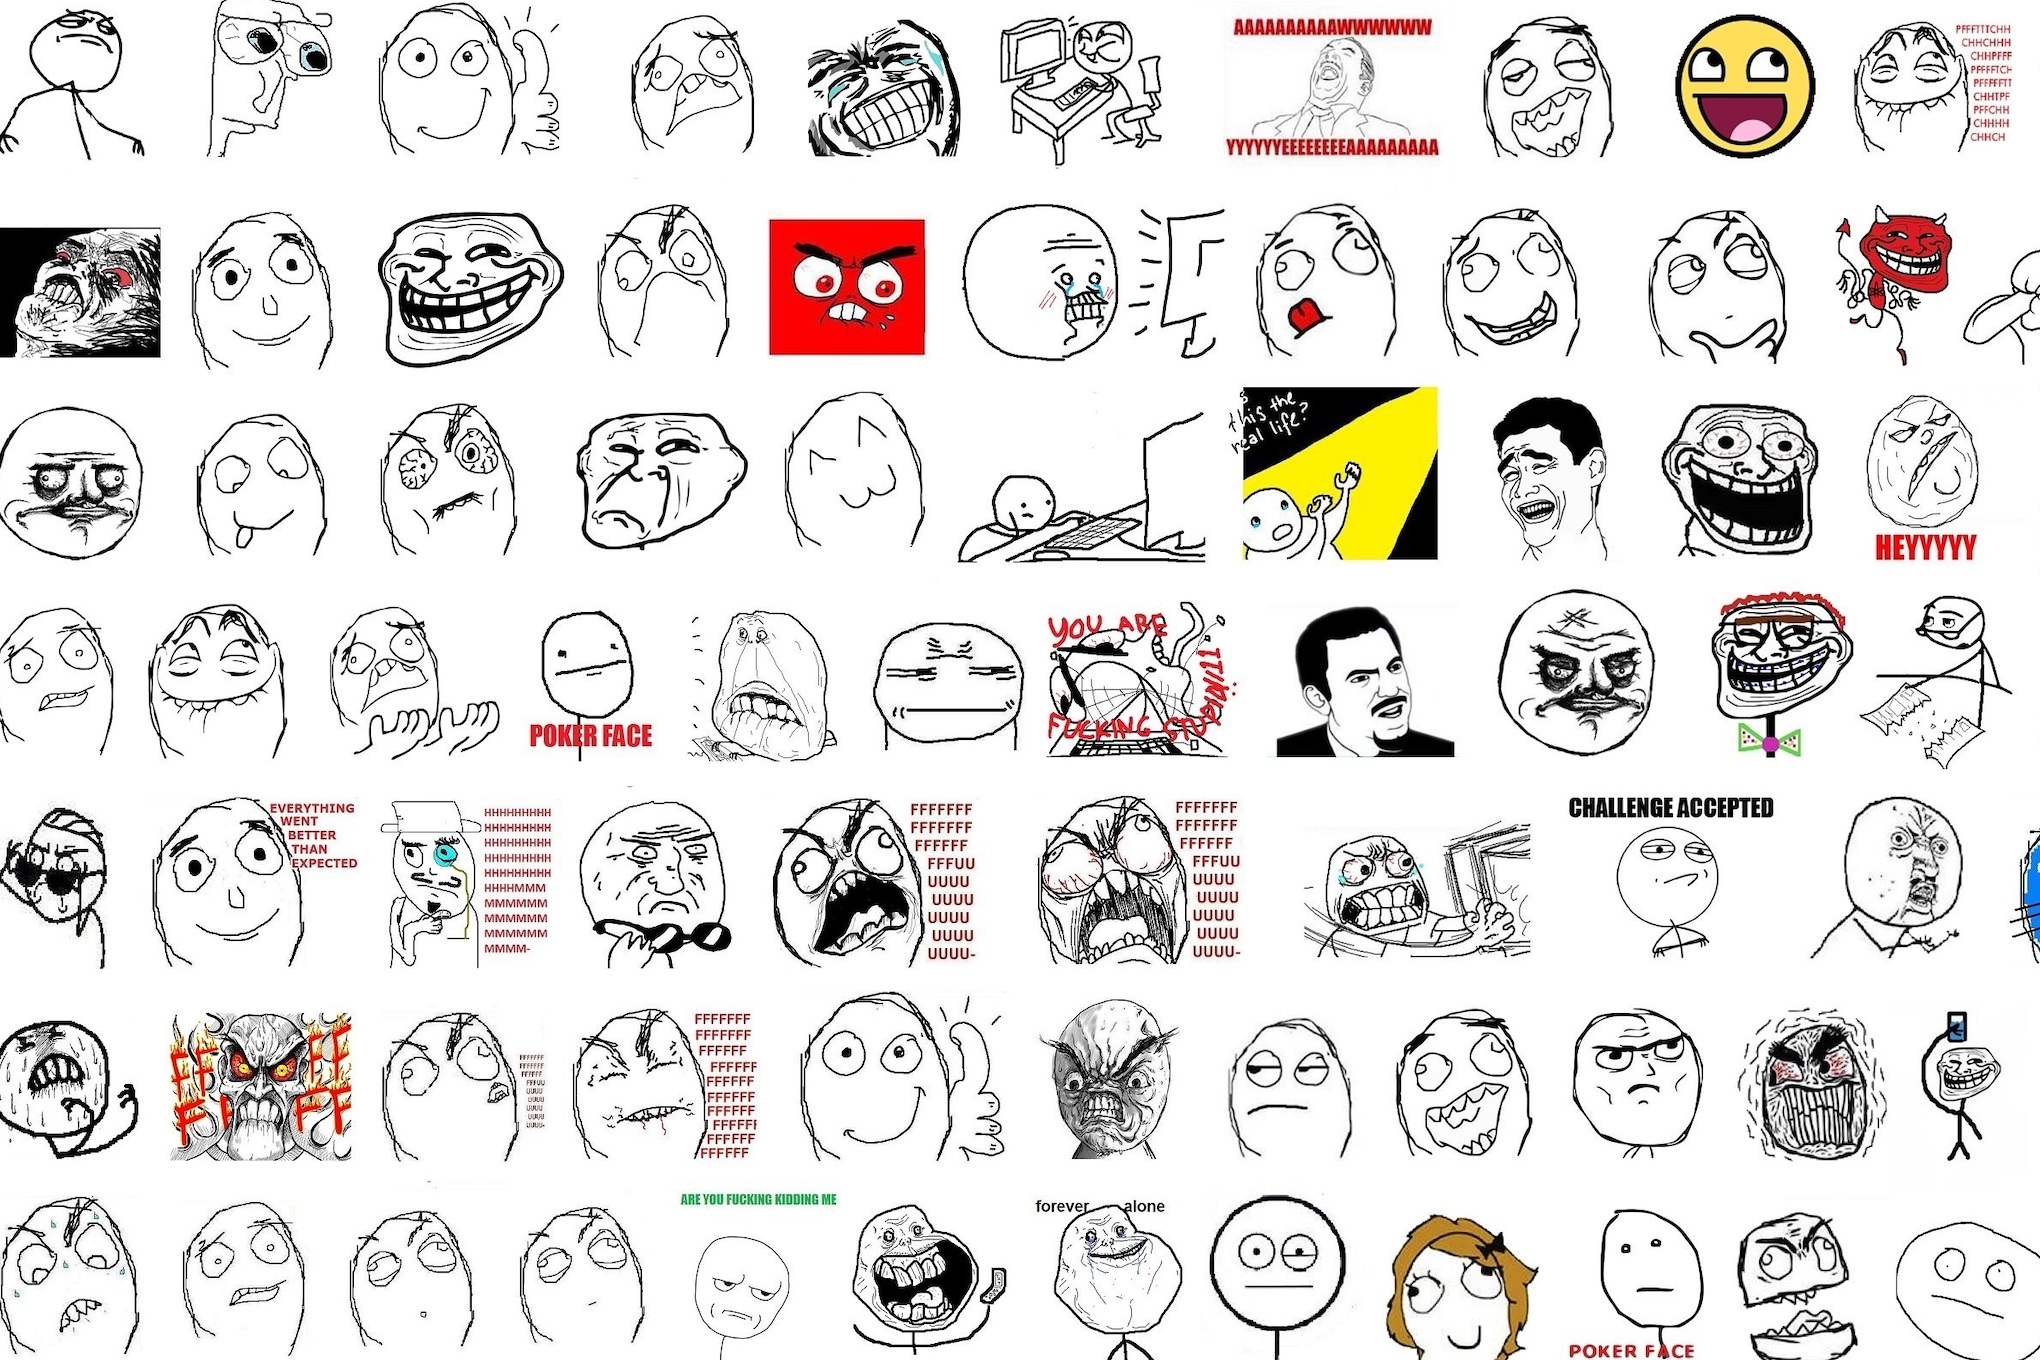 A selection of faces used in the making of rage face comics. 